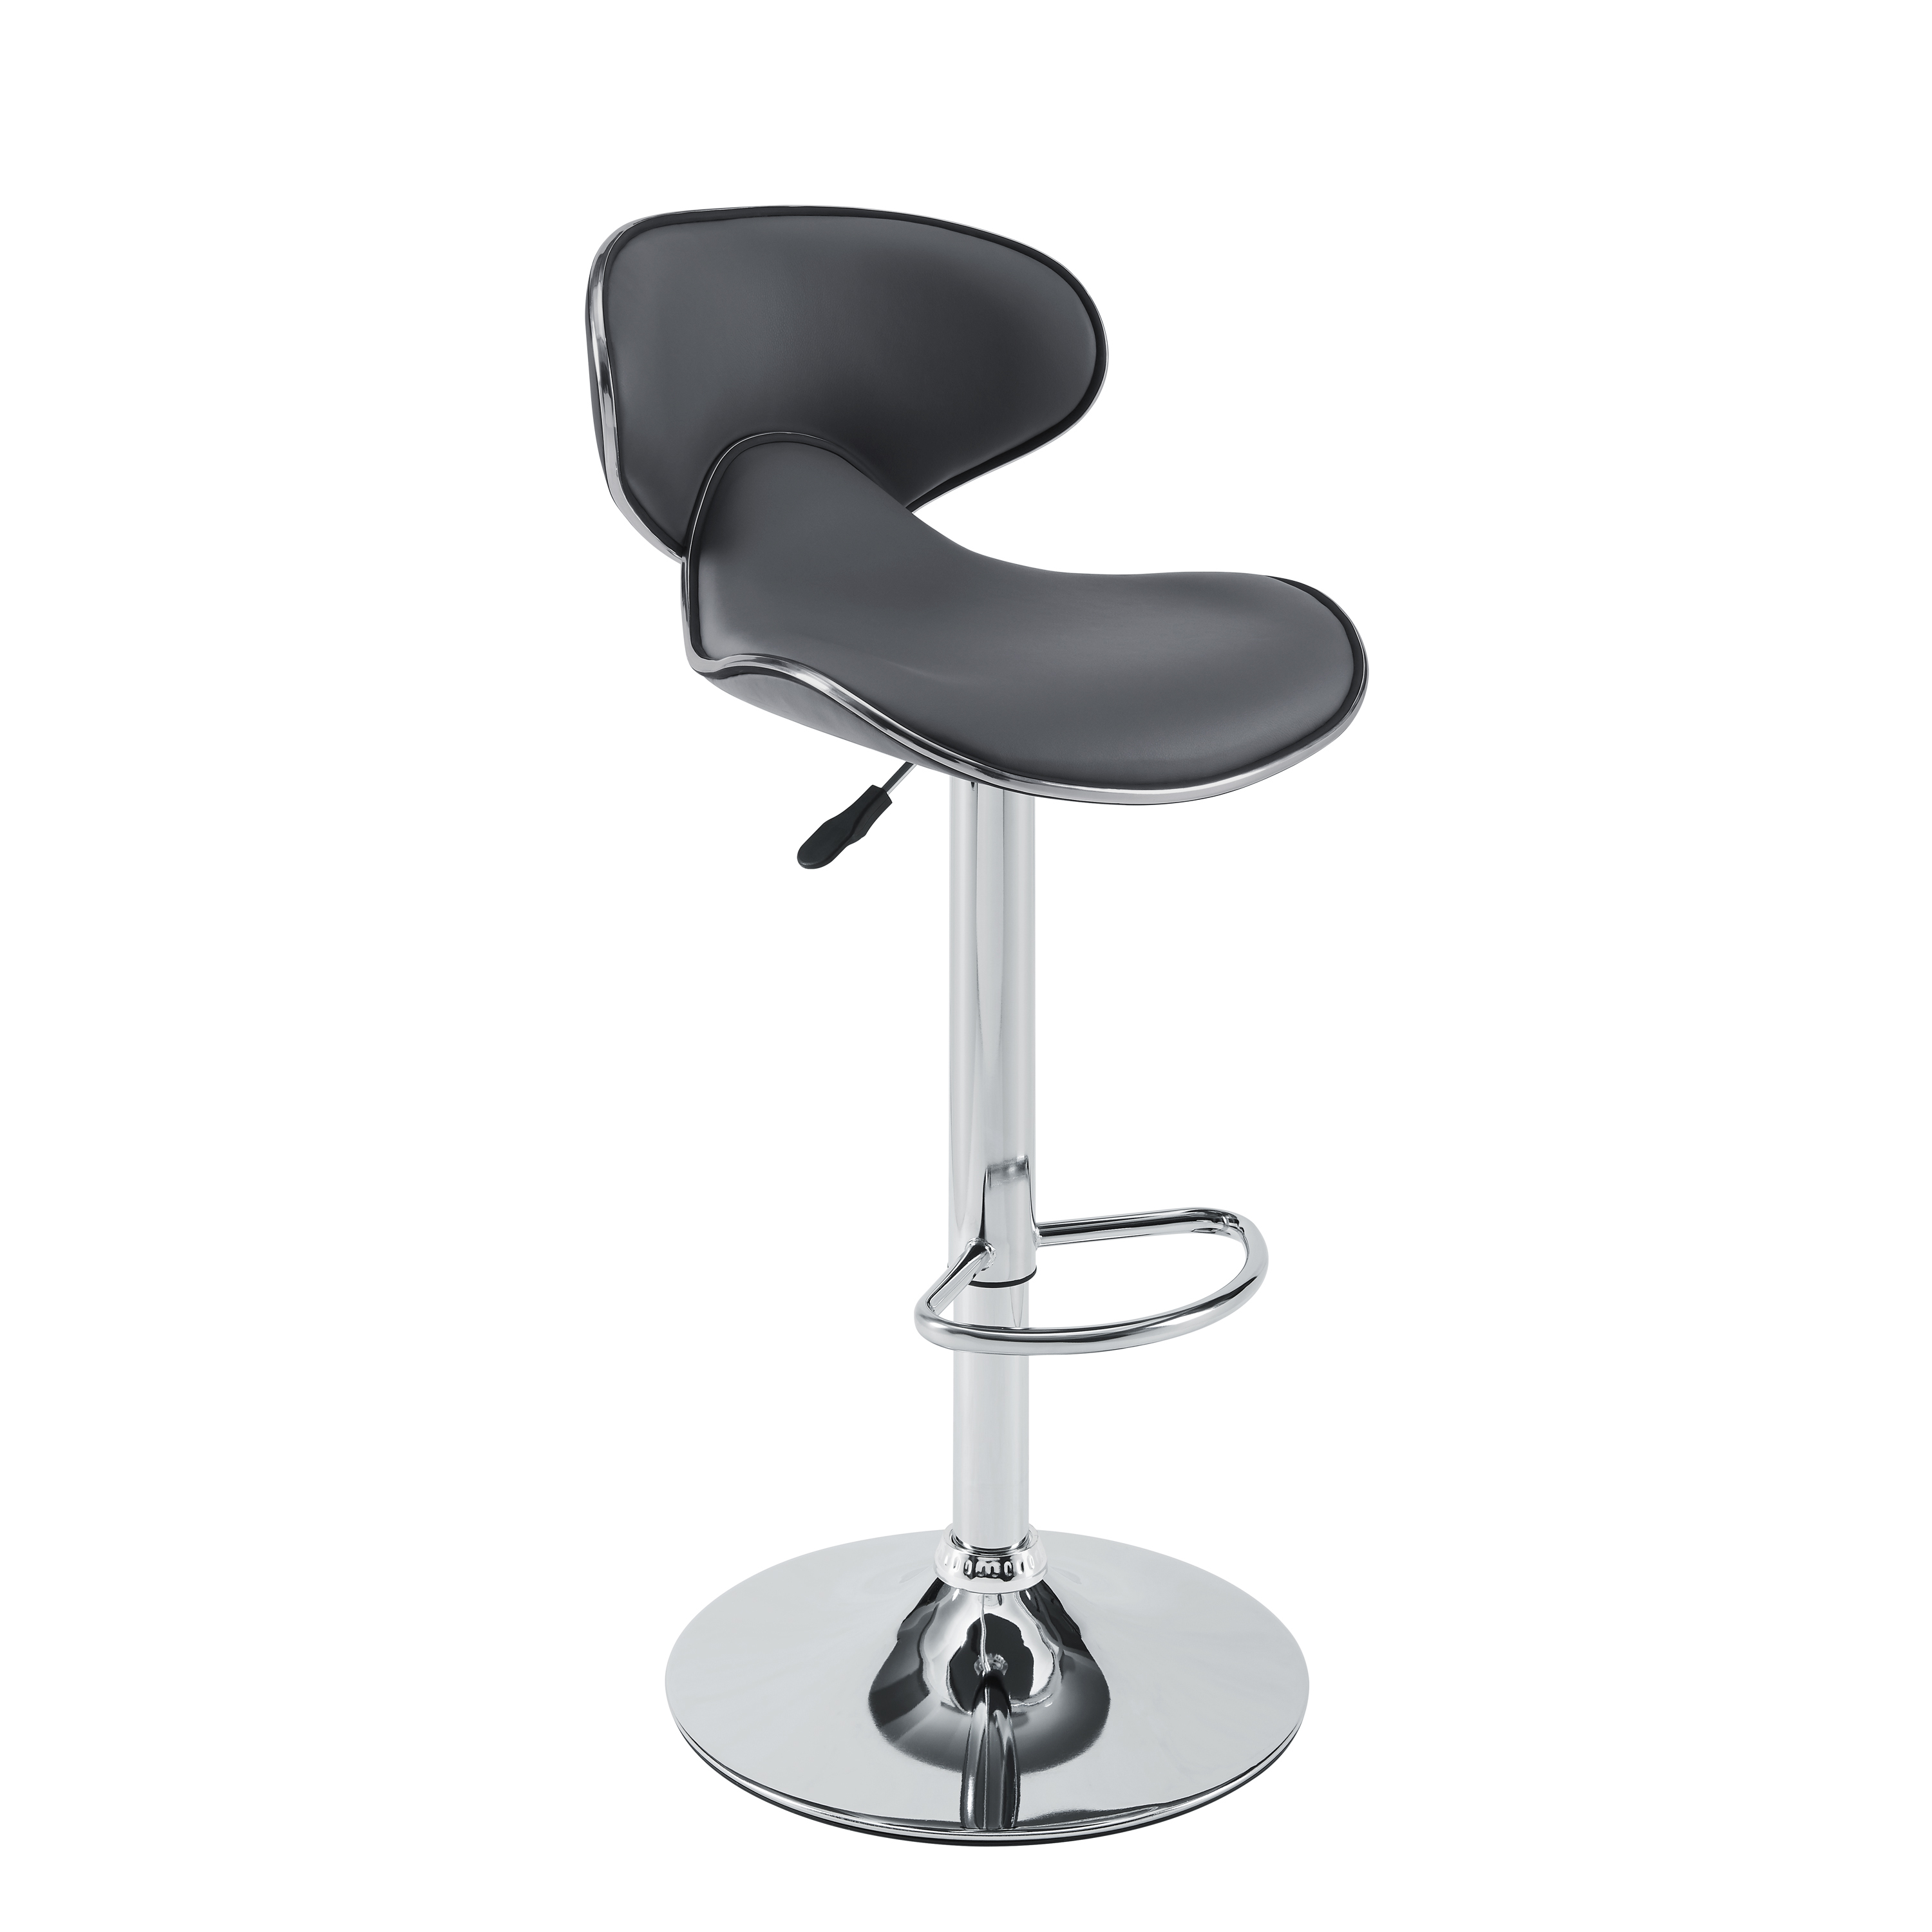 Powell Beldon 24-32" Indoor Adjustable Metal Bar Stool with Swivel, Gray Faux Leather - image 1 of 10